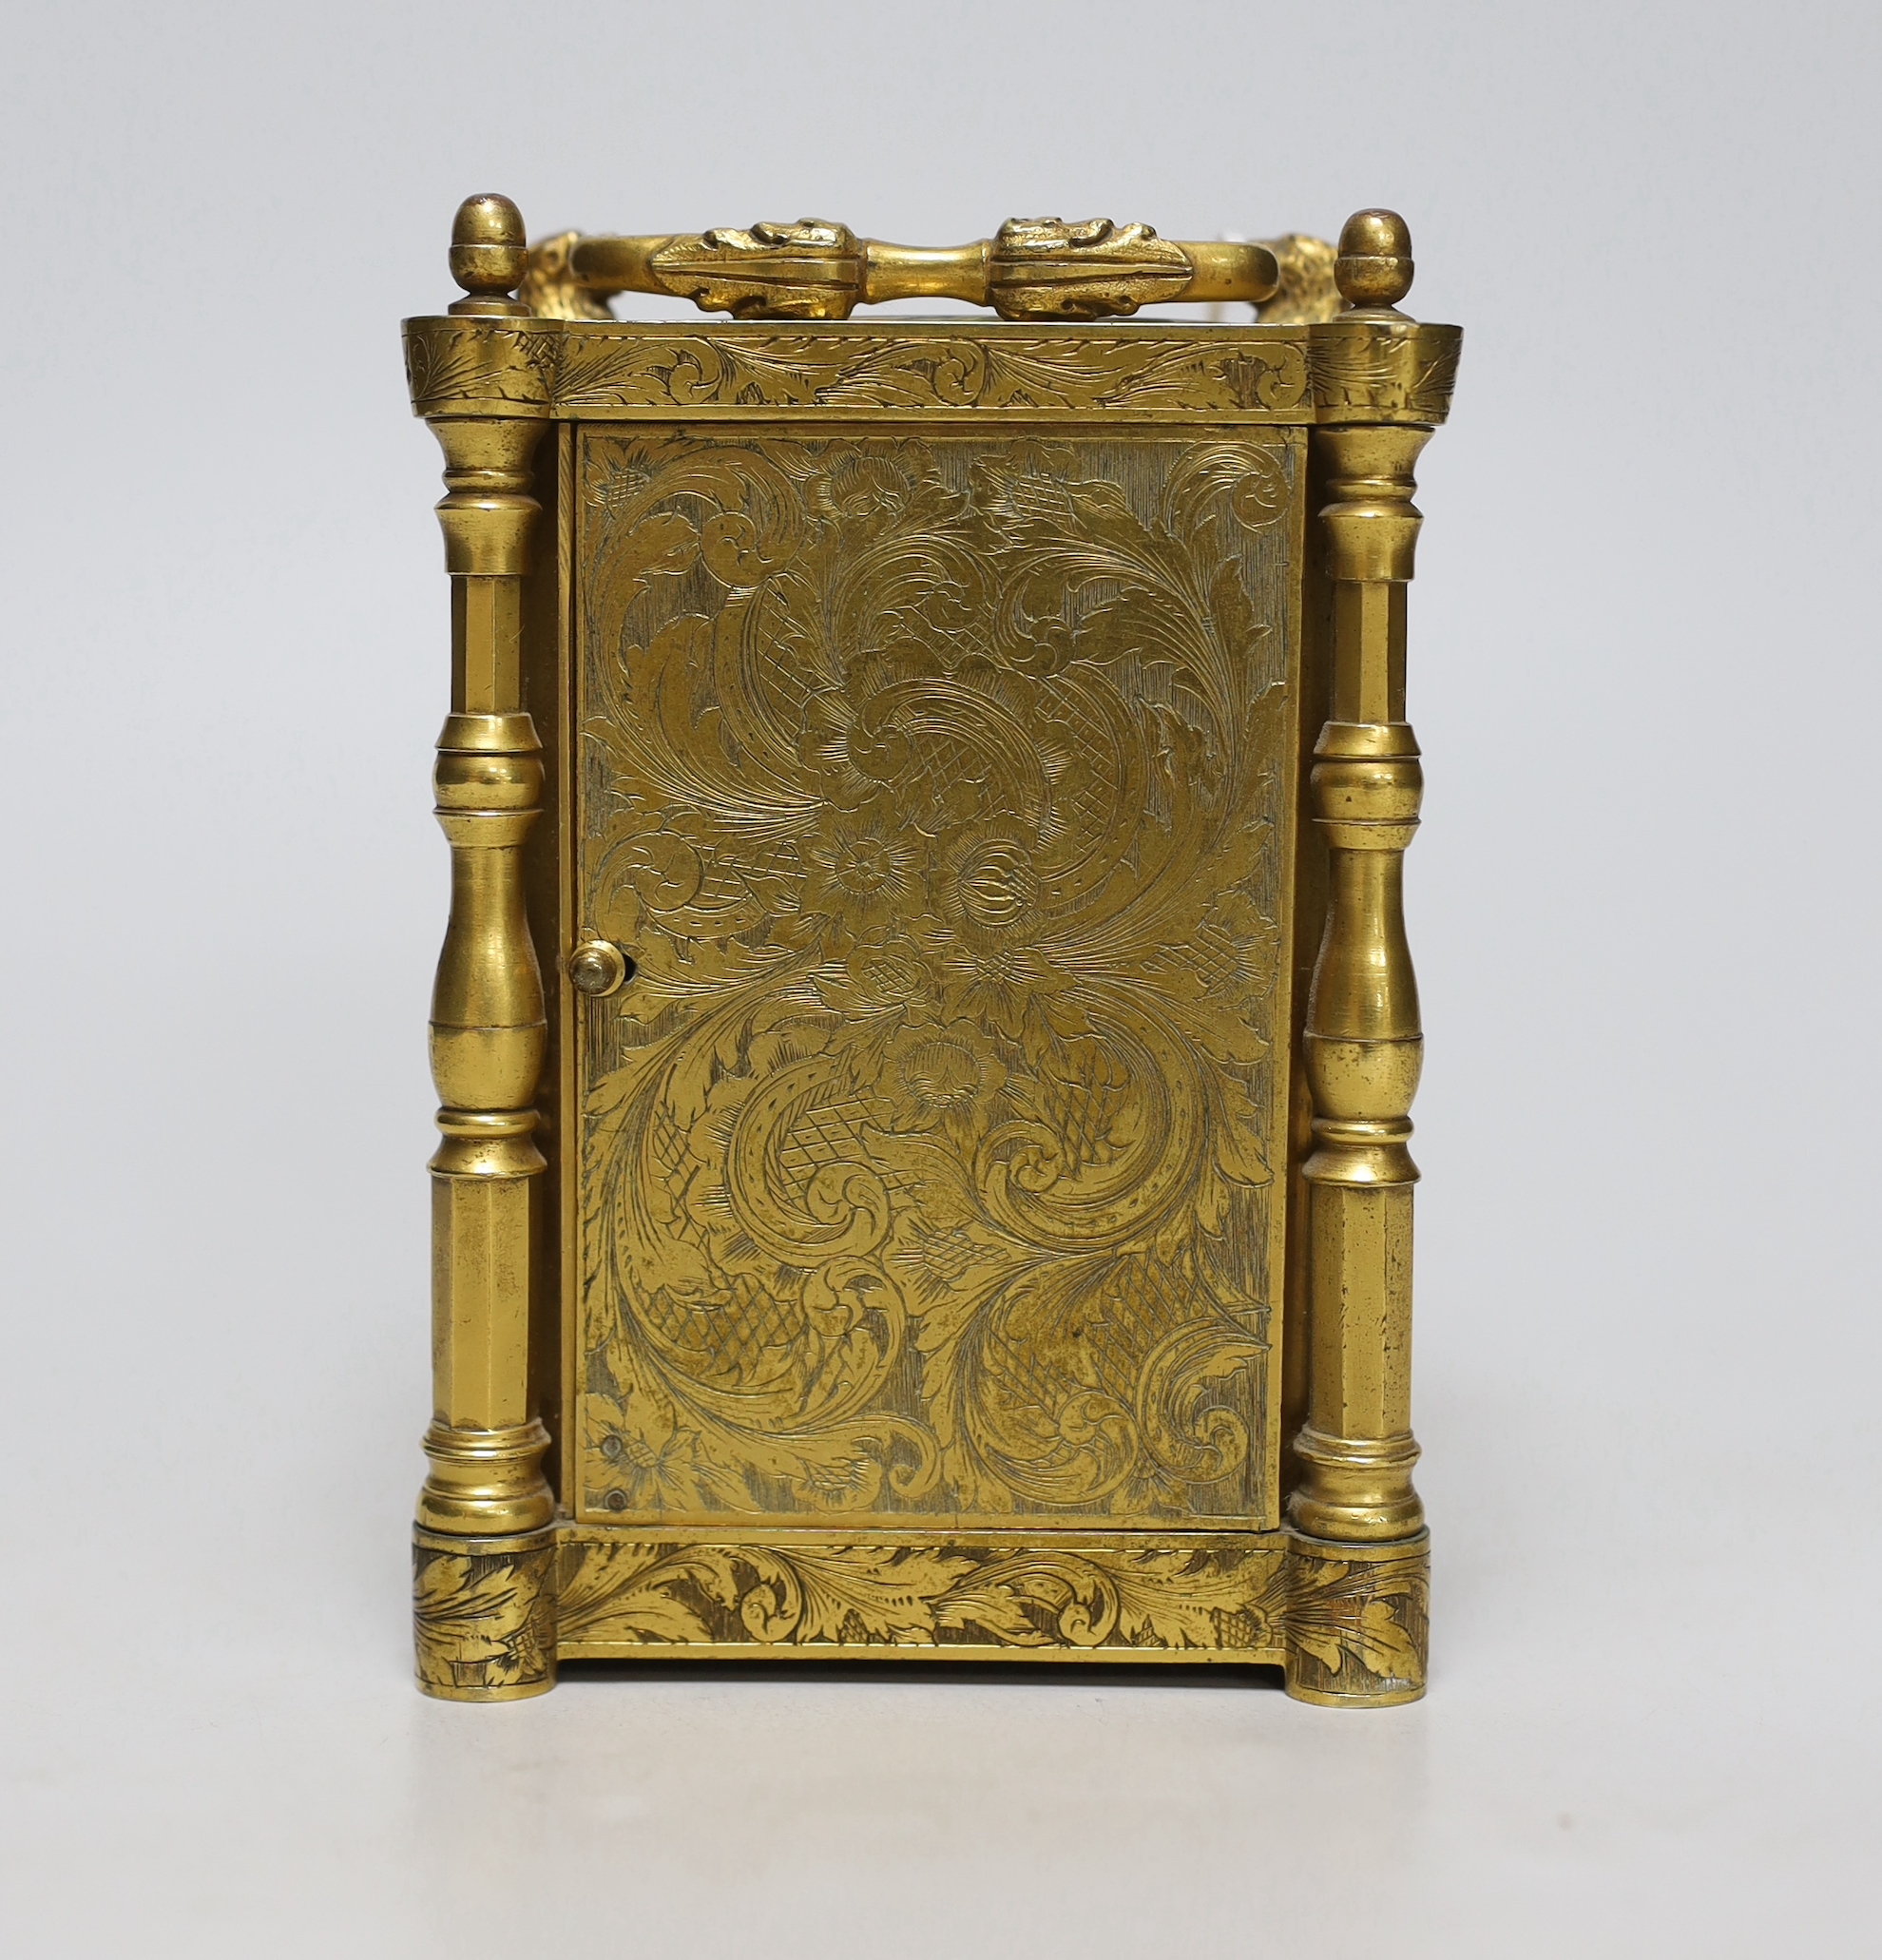 A mid 19th century French engraved gilt brass carriage clock, with tooled leather case, 16cm high - Image 3 of 6